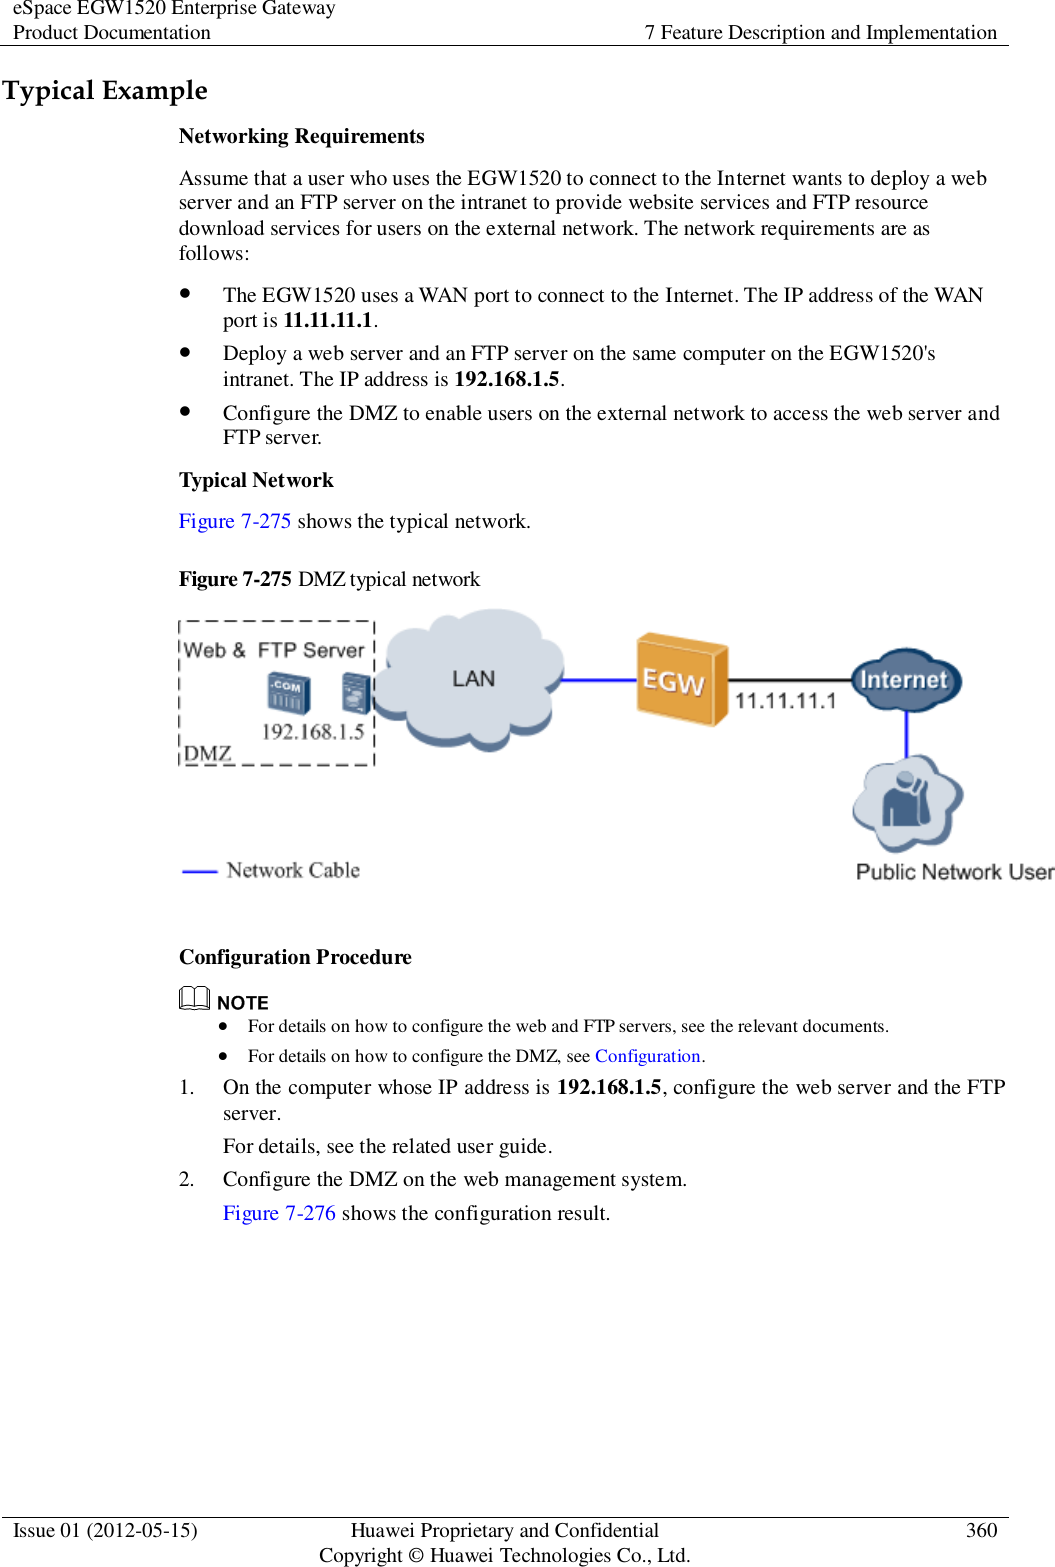 eSpace EGW1520 Enterprise Gateway Product Documentation 7 Feature Description and Implementation  Issue 01 (2012-05-15) Huawei Proprietary and Confidential                                     Copyright © Huawei Technologies Co., Ltd. 360  Typical Example Networking Requirements Assume that a user who uses the EGW1520 to connect to the Internet wants to deploy a web server and an FTP server on the intranet to provide website services and FTP resource download services for users on the external network. The network requirements are as follows:  The EGW1520 uses a WAN port to connect to the Internet. The IP address of the WAN port is 11.11.11.1.  Deploy a web server and an FTP server on the same computer on the EGW1520&apos;s intranet. The IP address is 192.168.1.5.  Configure the DMZ to enable users on the external network to access the web server and FTP server. Typical Network Figure 7-275 shows the typical network. Figure 7-275 DMZ typical network   Configuration Procedure   For details on how to configure the web and FTP servers, see the relevant documents.  For details on how to configure the DMZ, see Configuration. 1. On the computer whose IP address is 192.168.1.5, configure the web server and the FTP server. For details, see the related user guide. 2. Configure the DMZ on the web management system. Figure 7-276 shows the configuration result. 